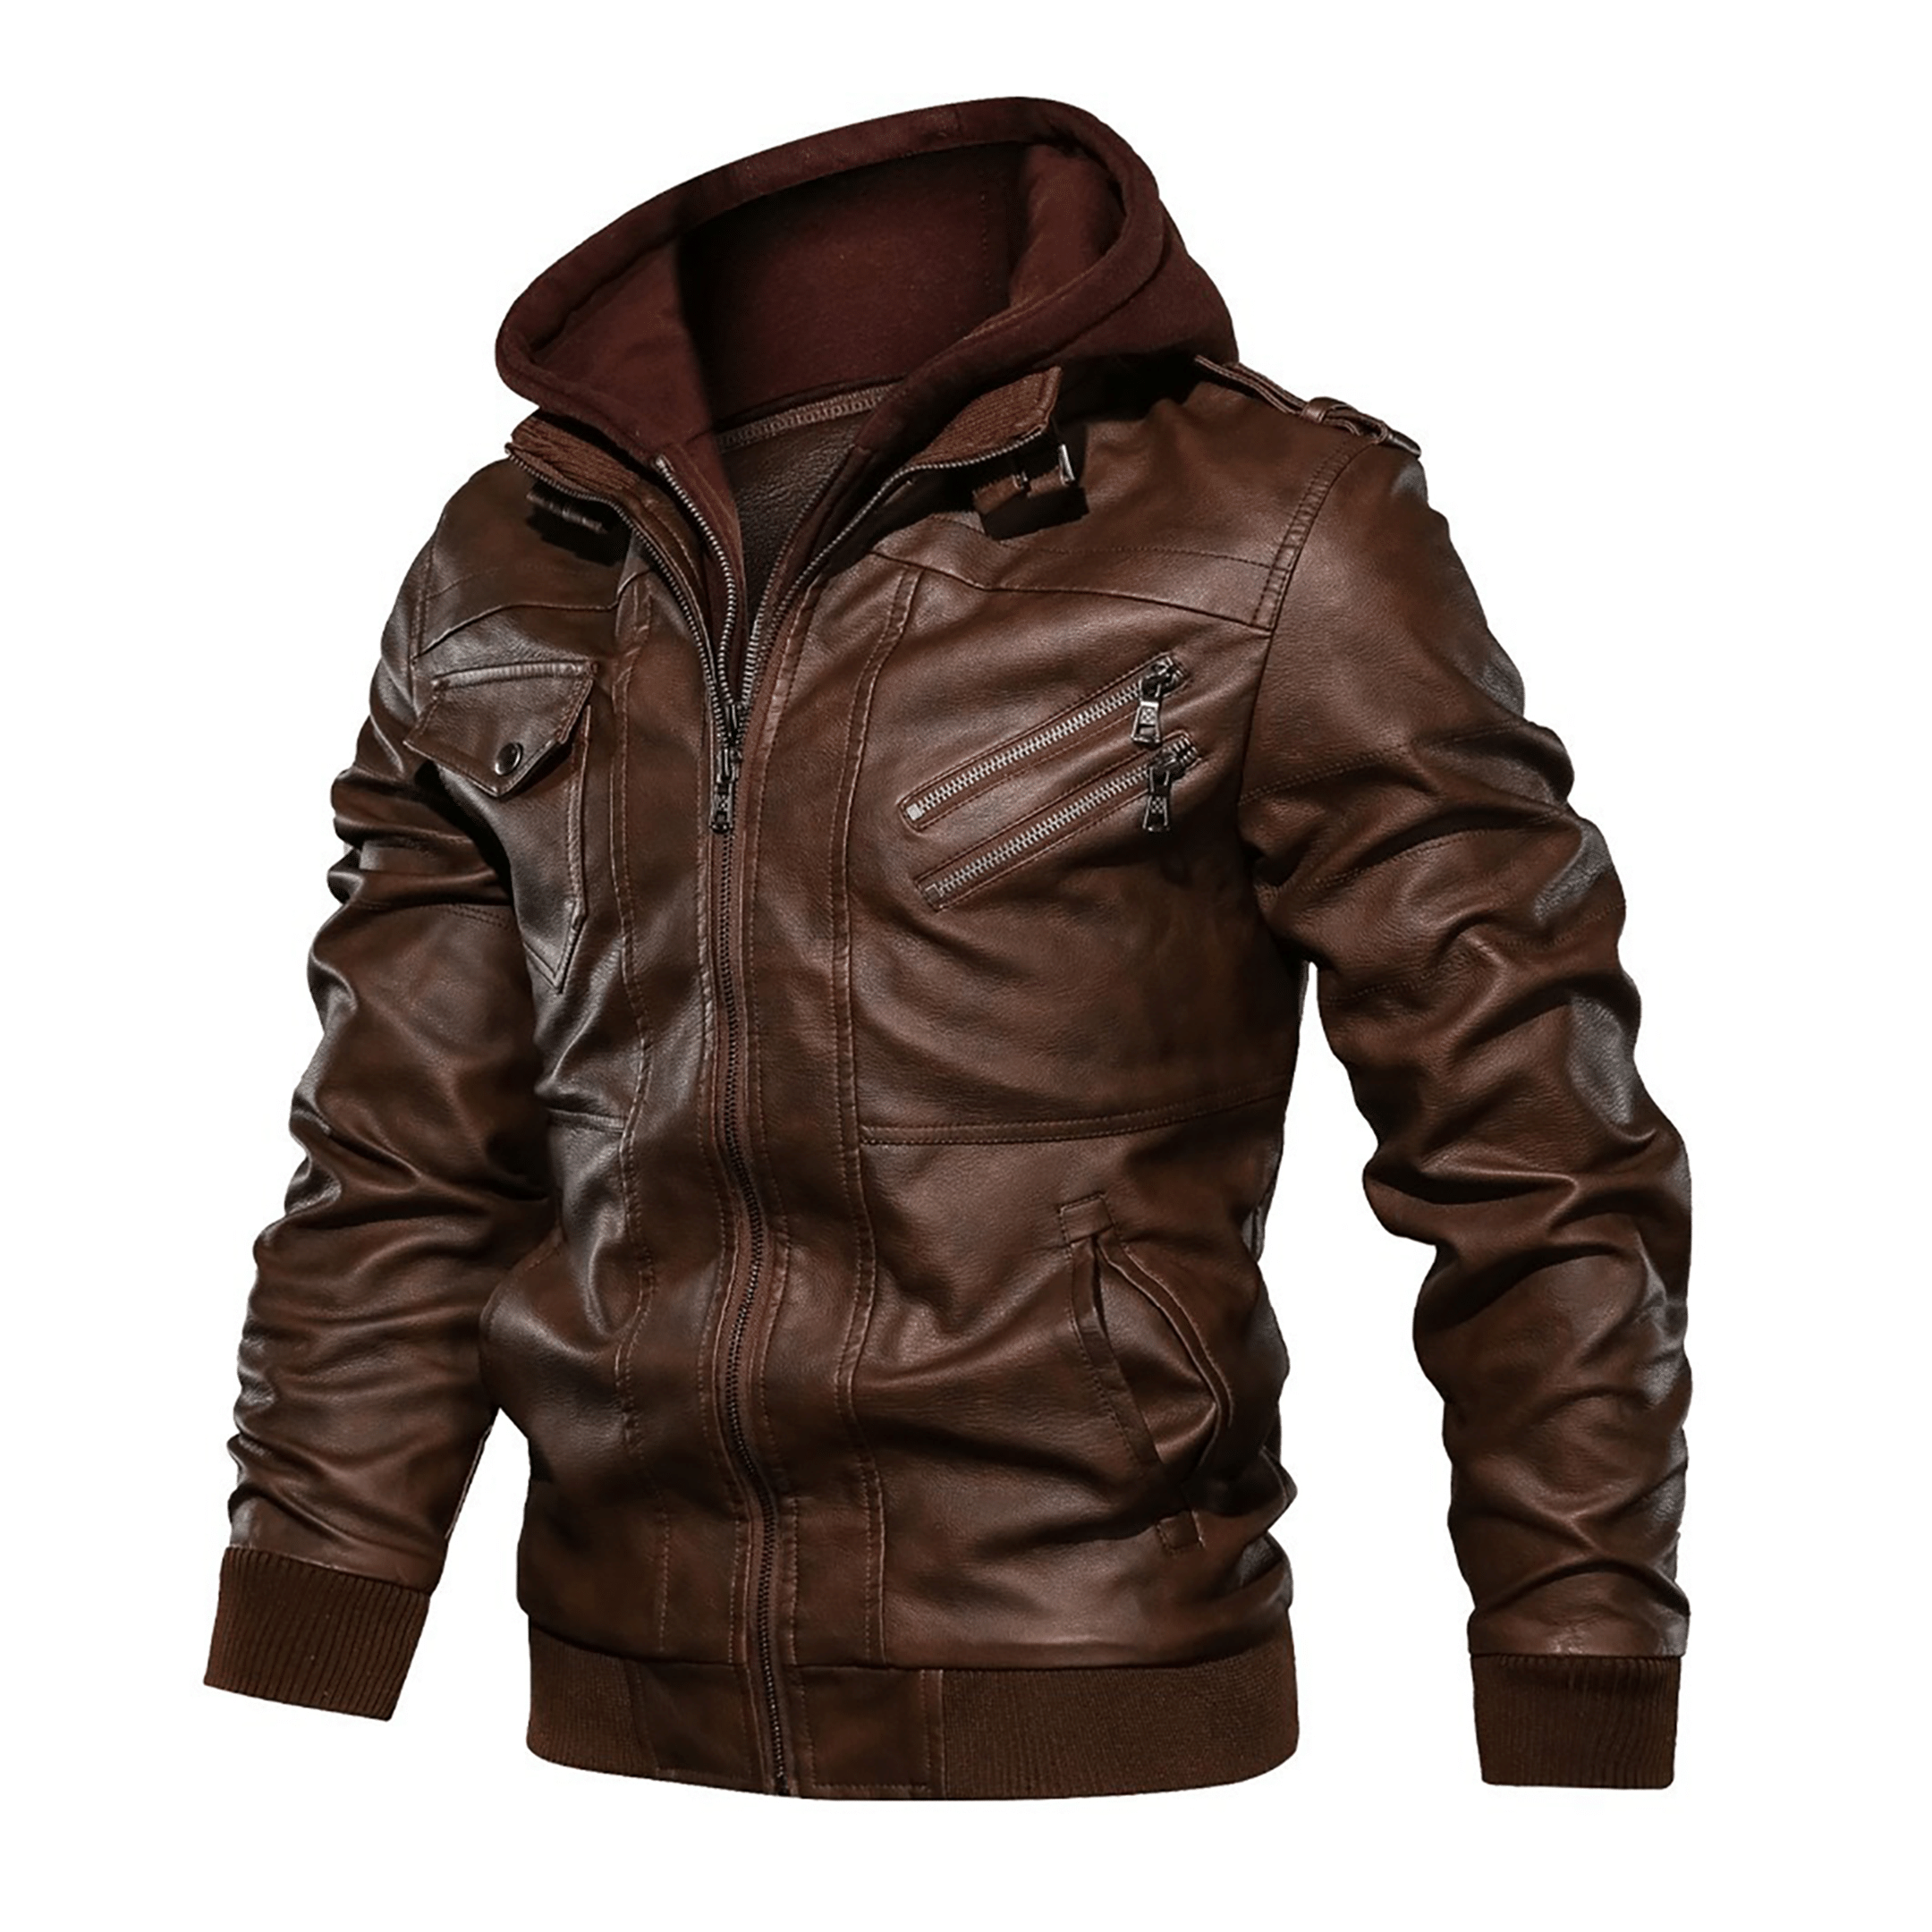 Top leather jackets and latest products 251